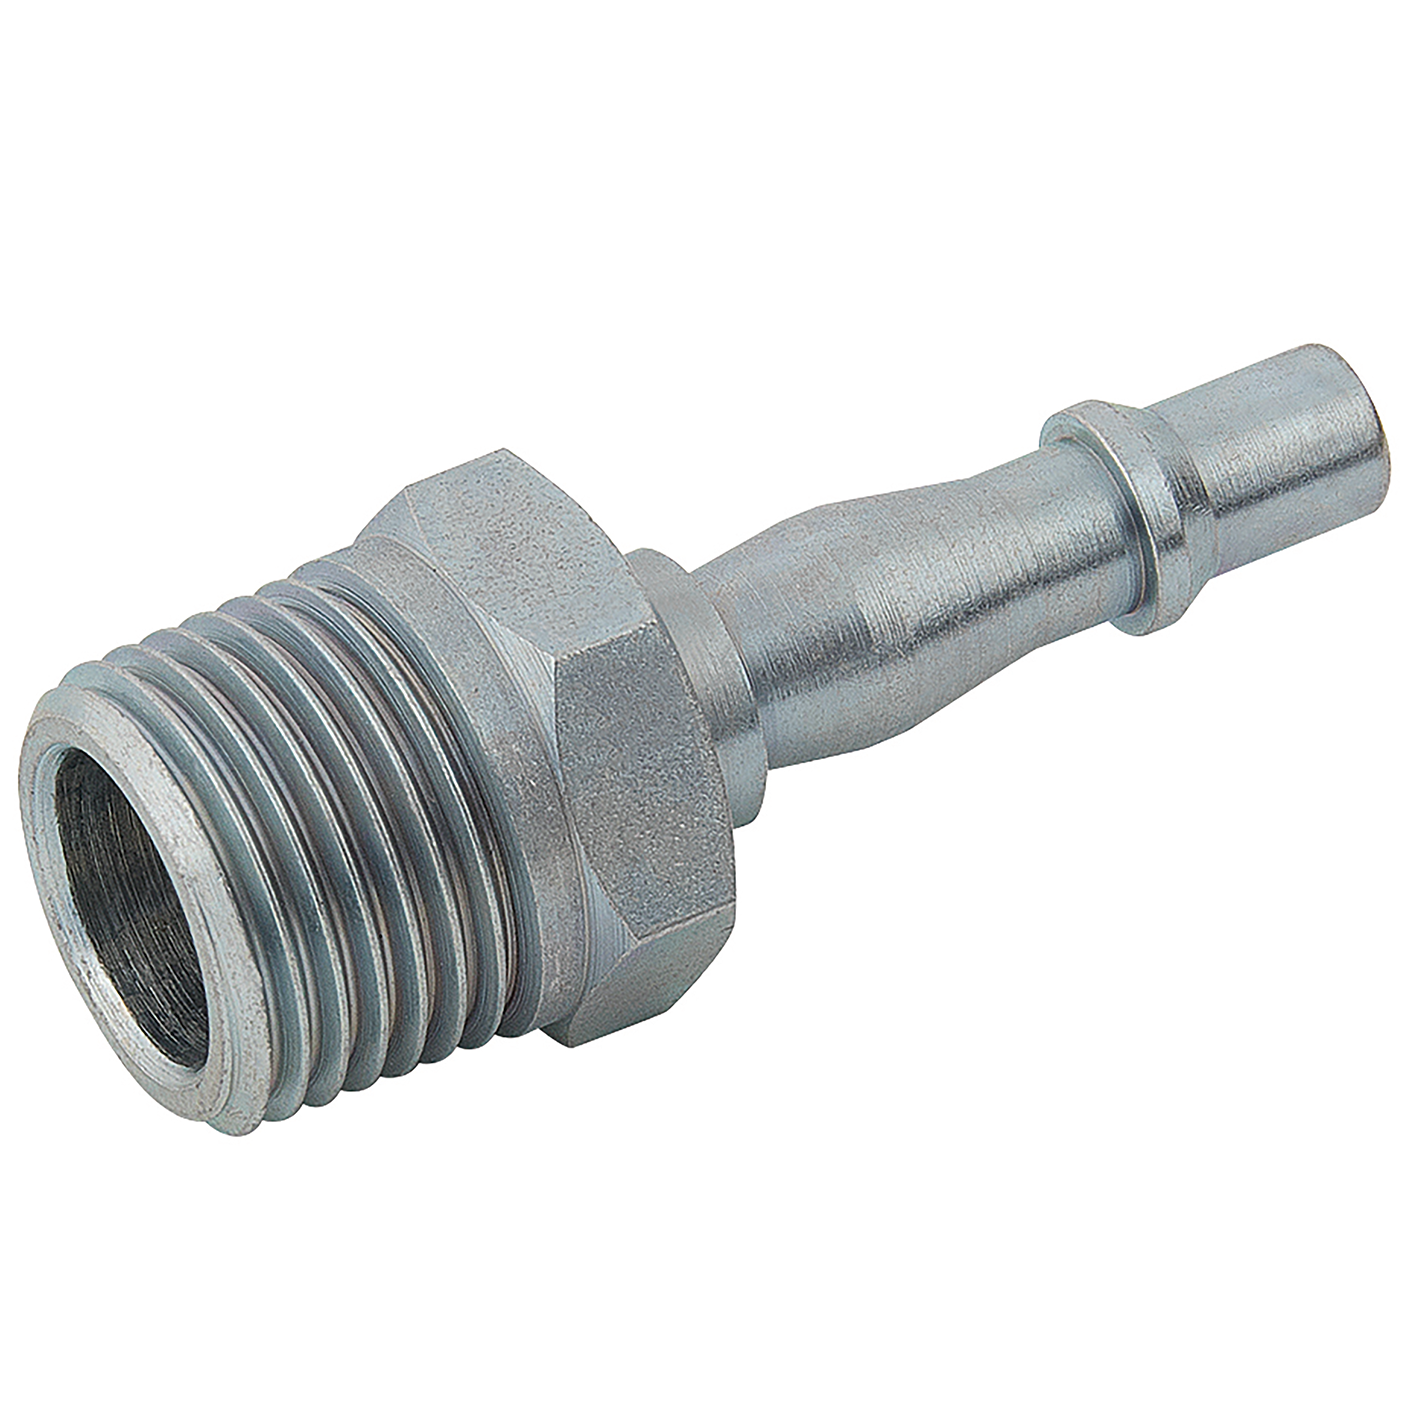 1/4" BSPT Male Safety Plug Series 19